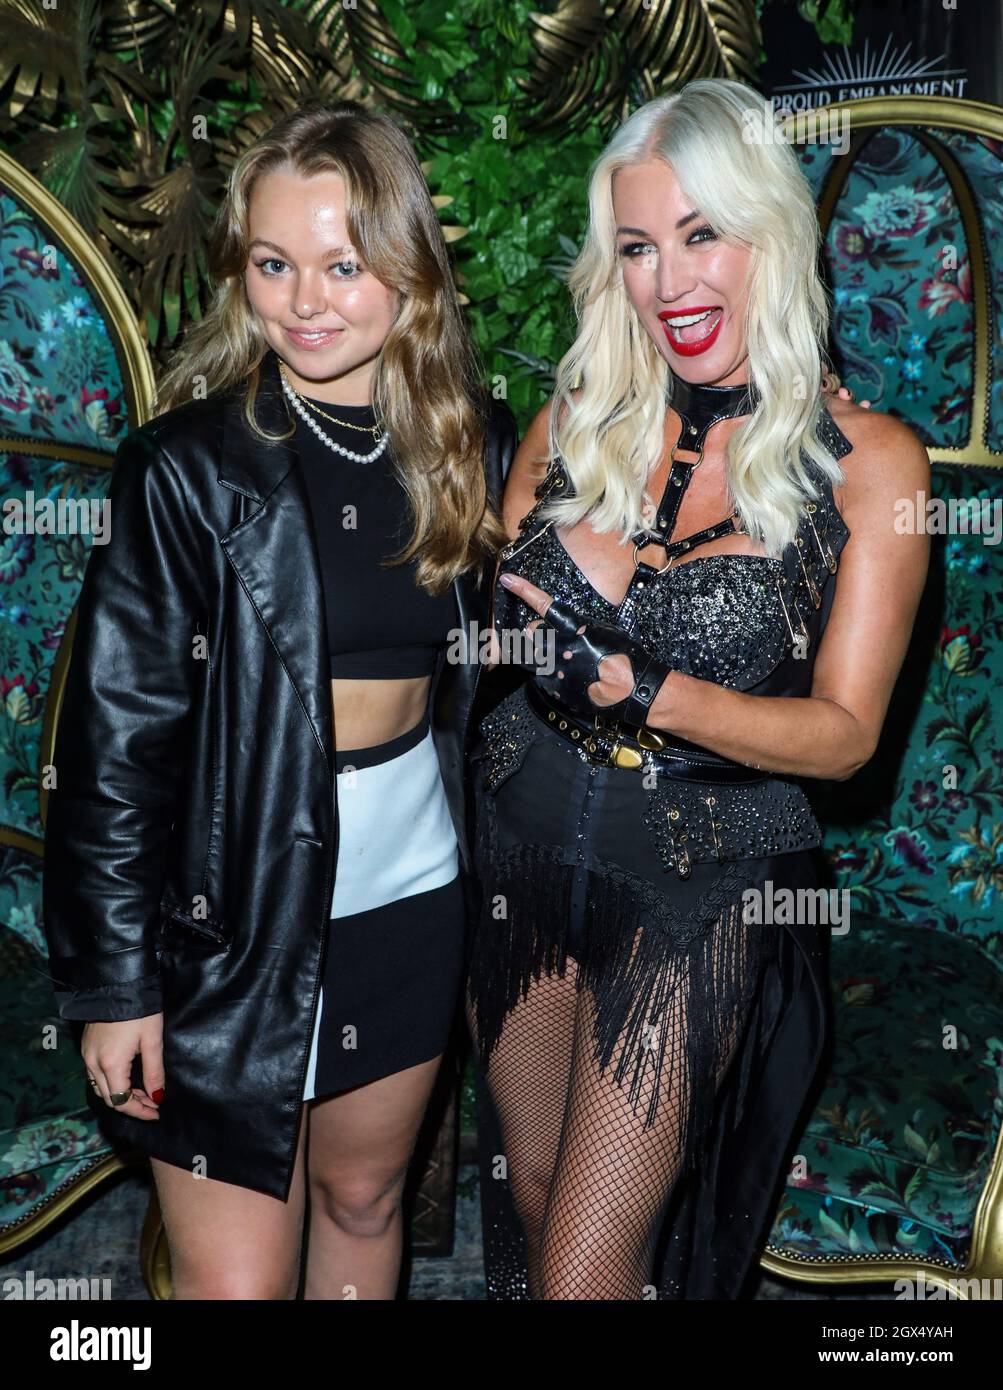 Neighbours star, Jemma Donovan reunites with her on screen mother Denise Van Outen after watching her perform in Cabaret All Stars at Proud Embankment in London. Jemma’s famous father is Neighbours legend Jason Donovan. (Photo by Brett Cove / SOPA Images/Sipa USA) Stock Photo